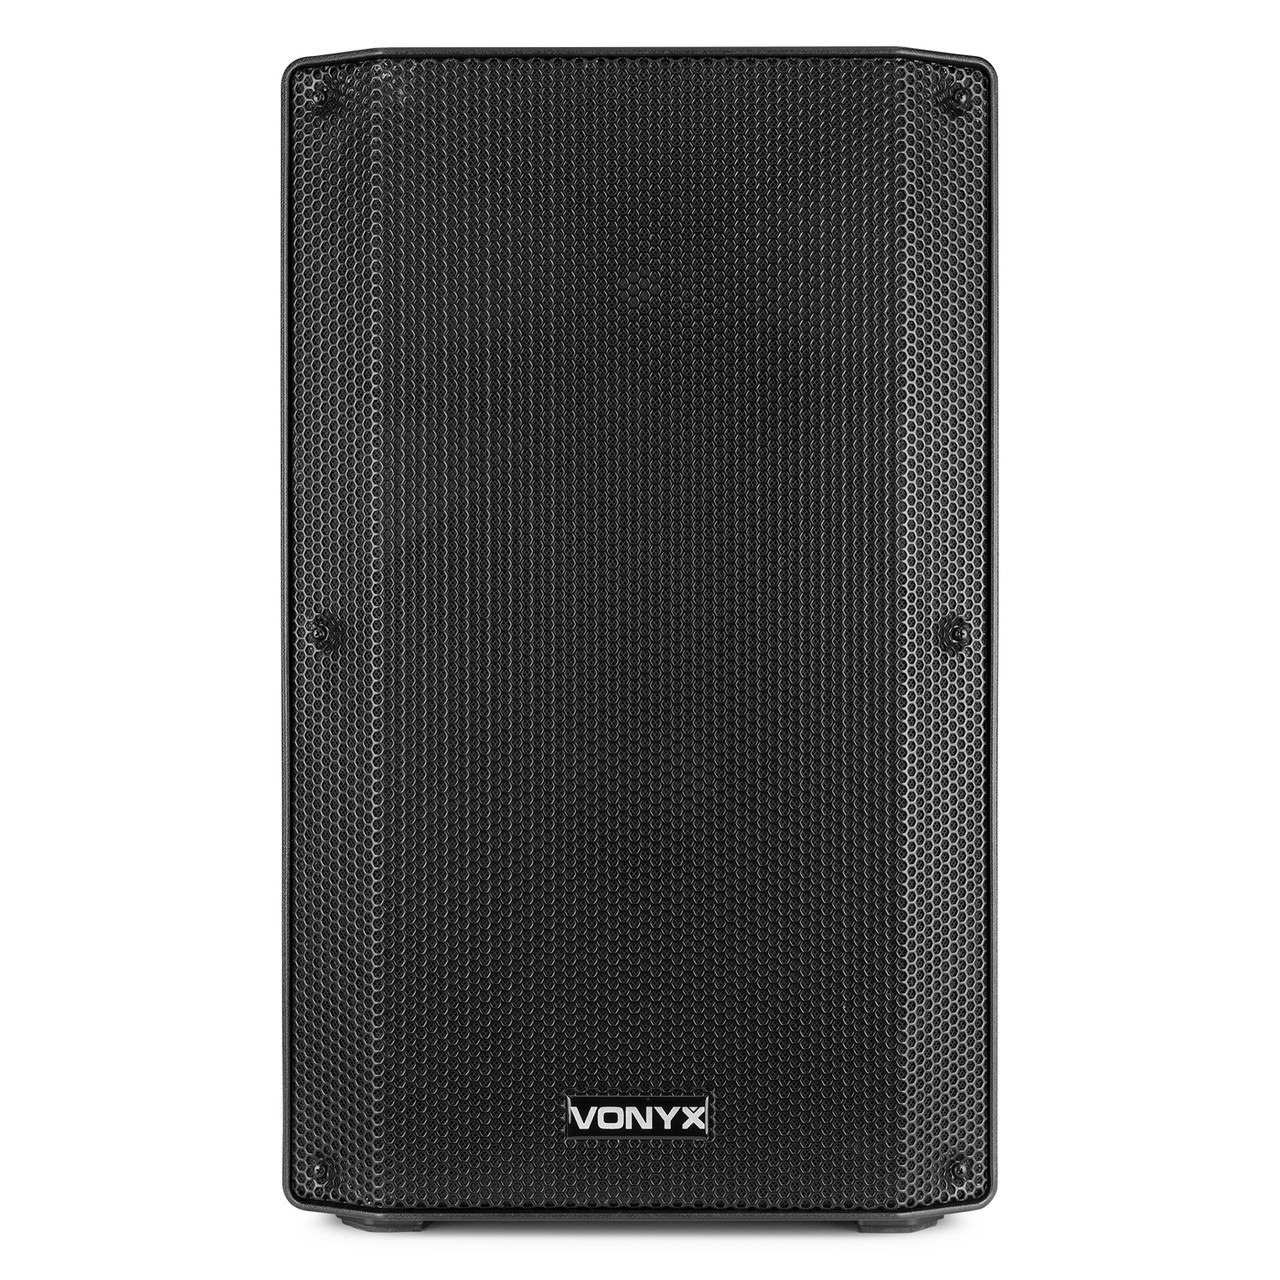 Vonyx VSA500 12" 800W Battery Powered Portable PA System with Dual Wireless Handheld Mics